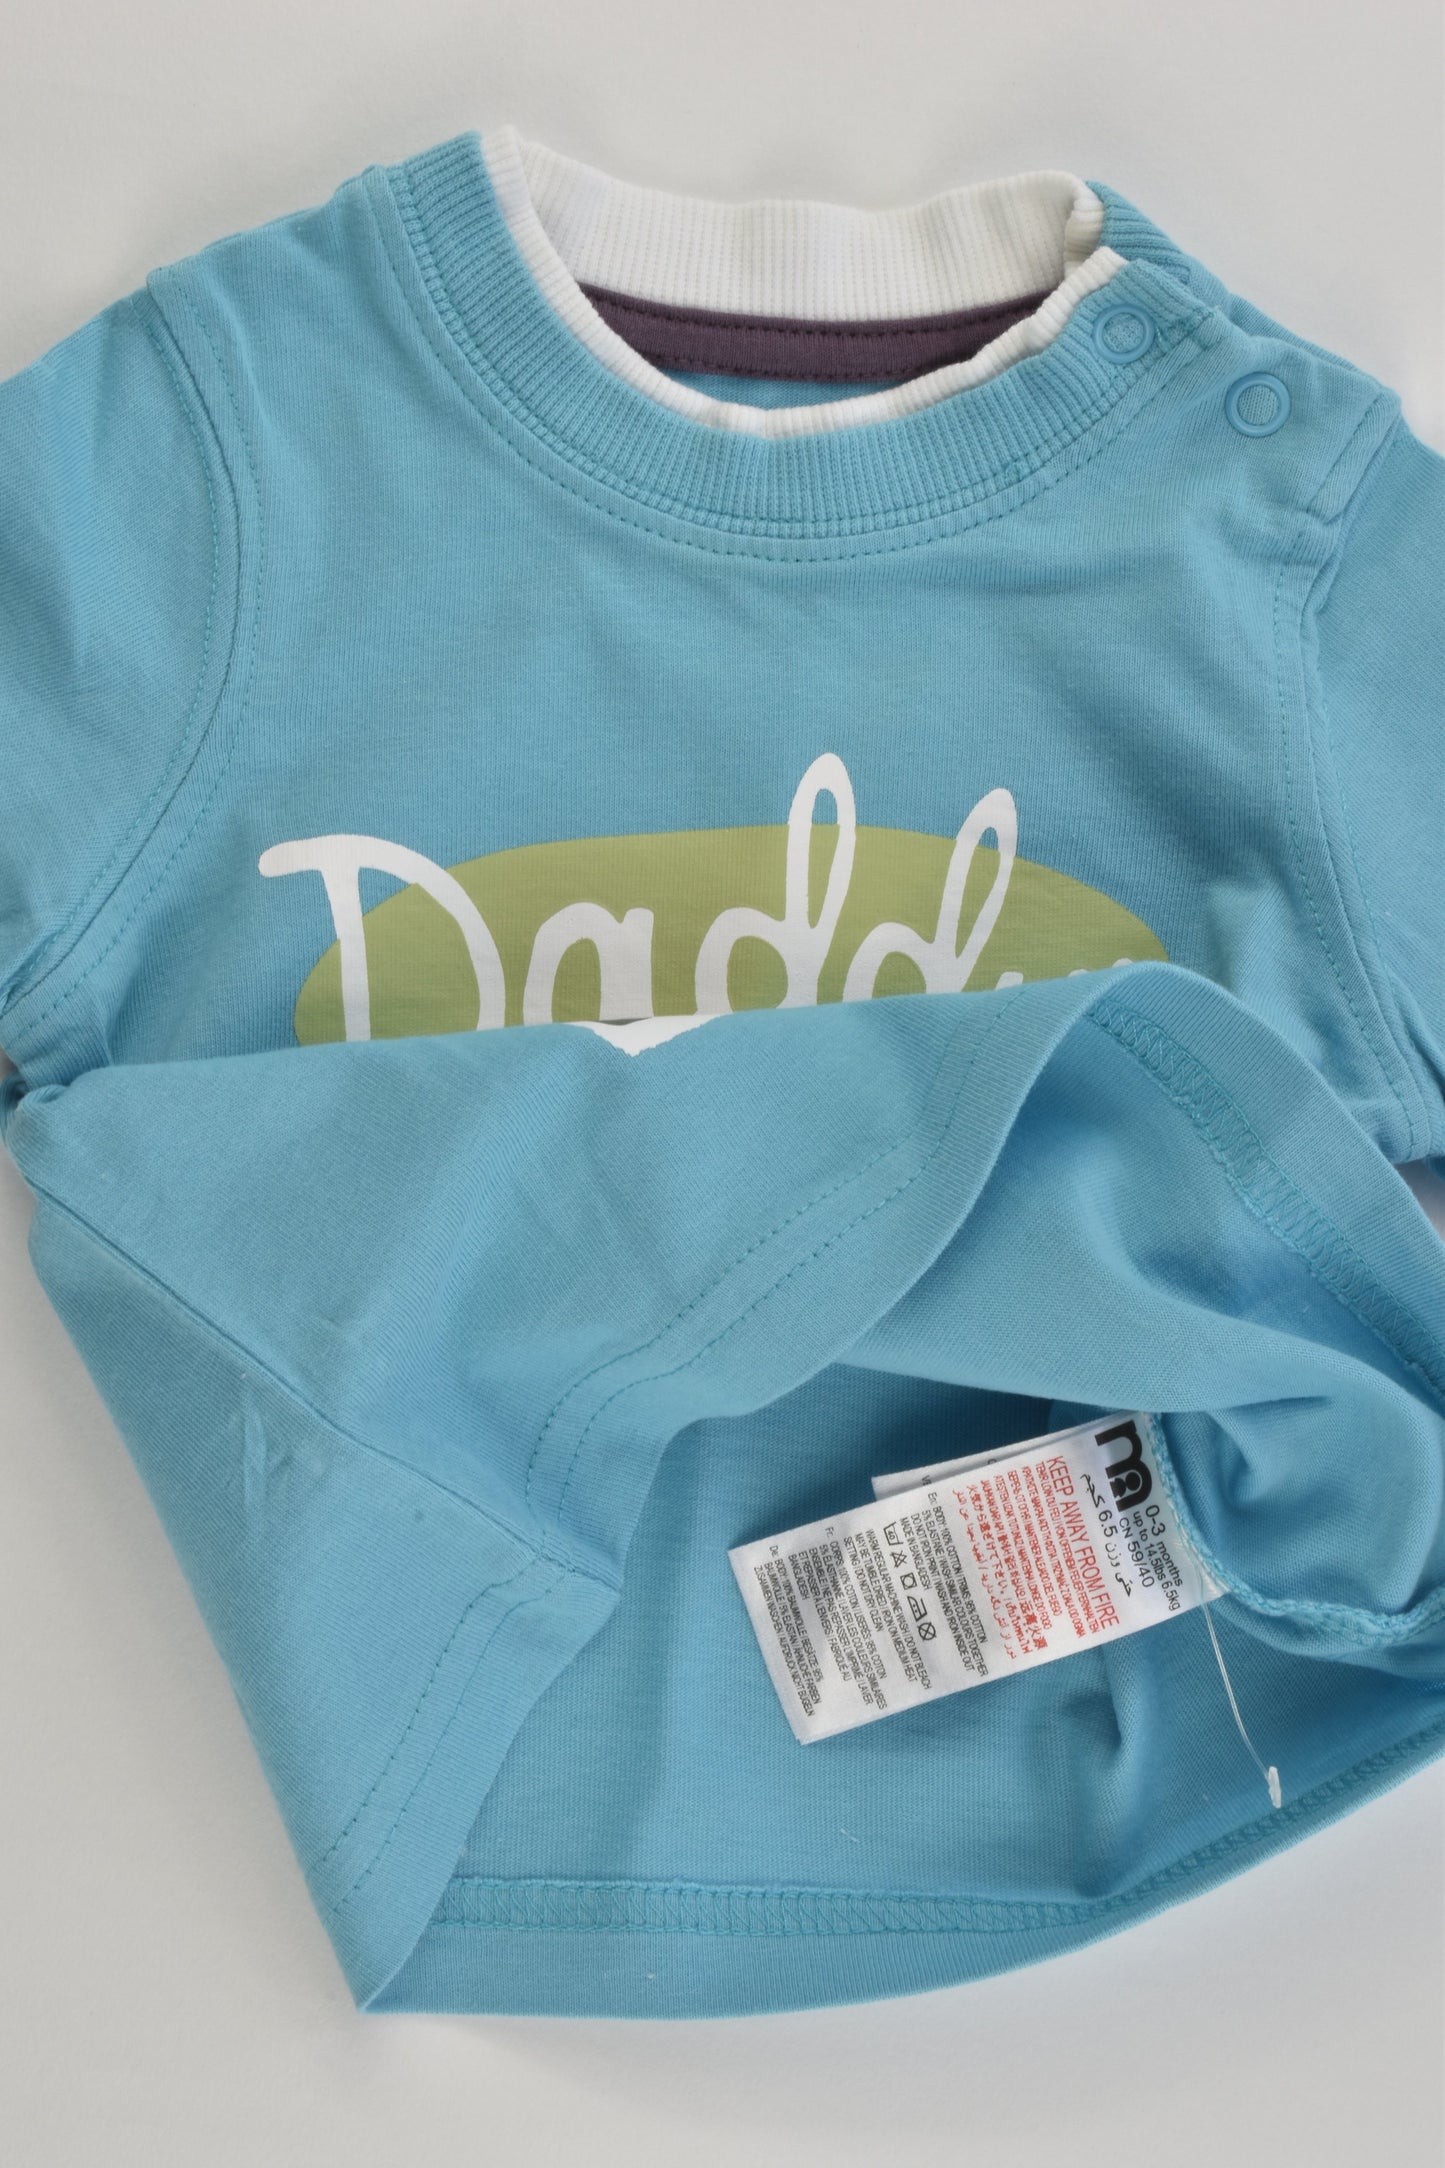 Mothercare Size 000 (0-3 months) 'Daddy's Little Hero' T-shirt